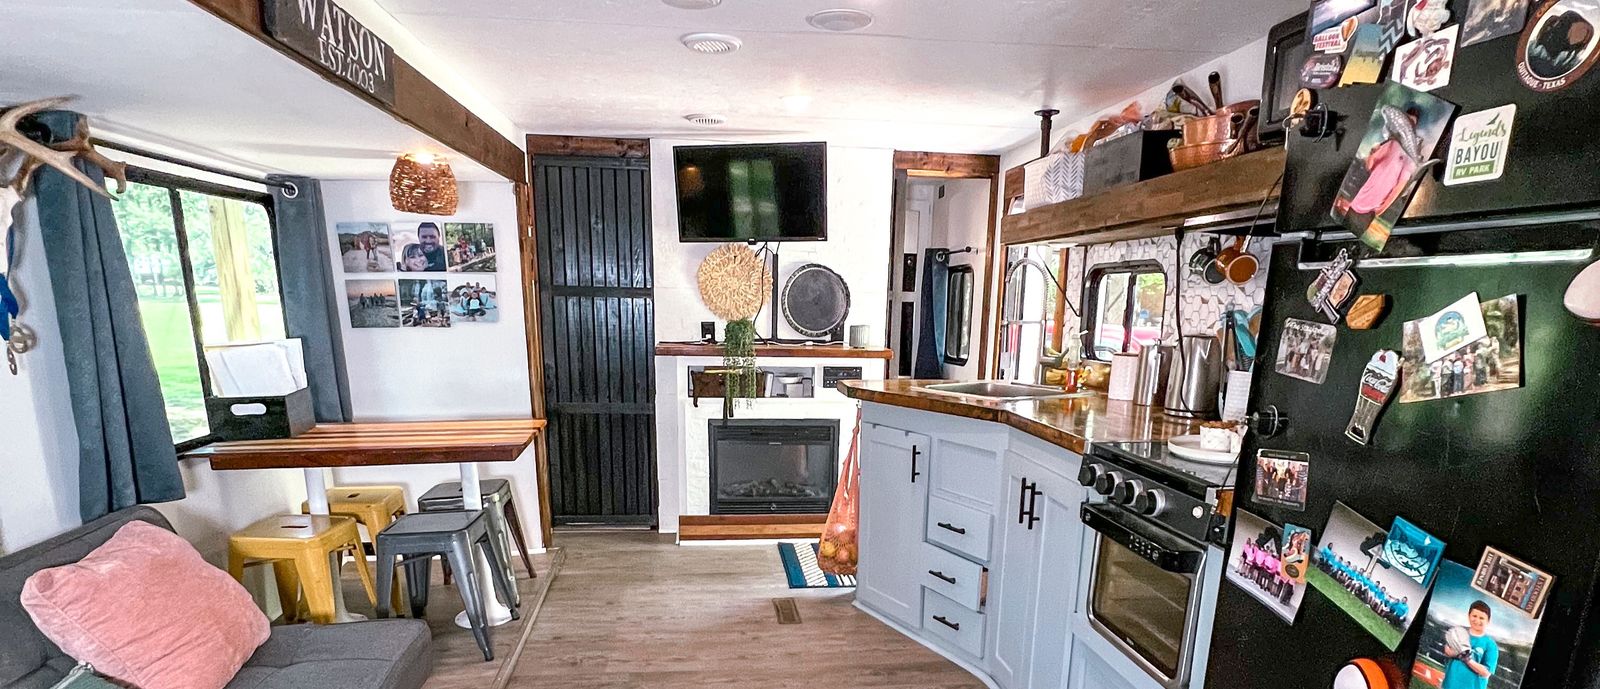 Small RV Refrigerators: The space-savers in your RV